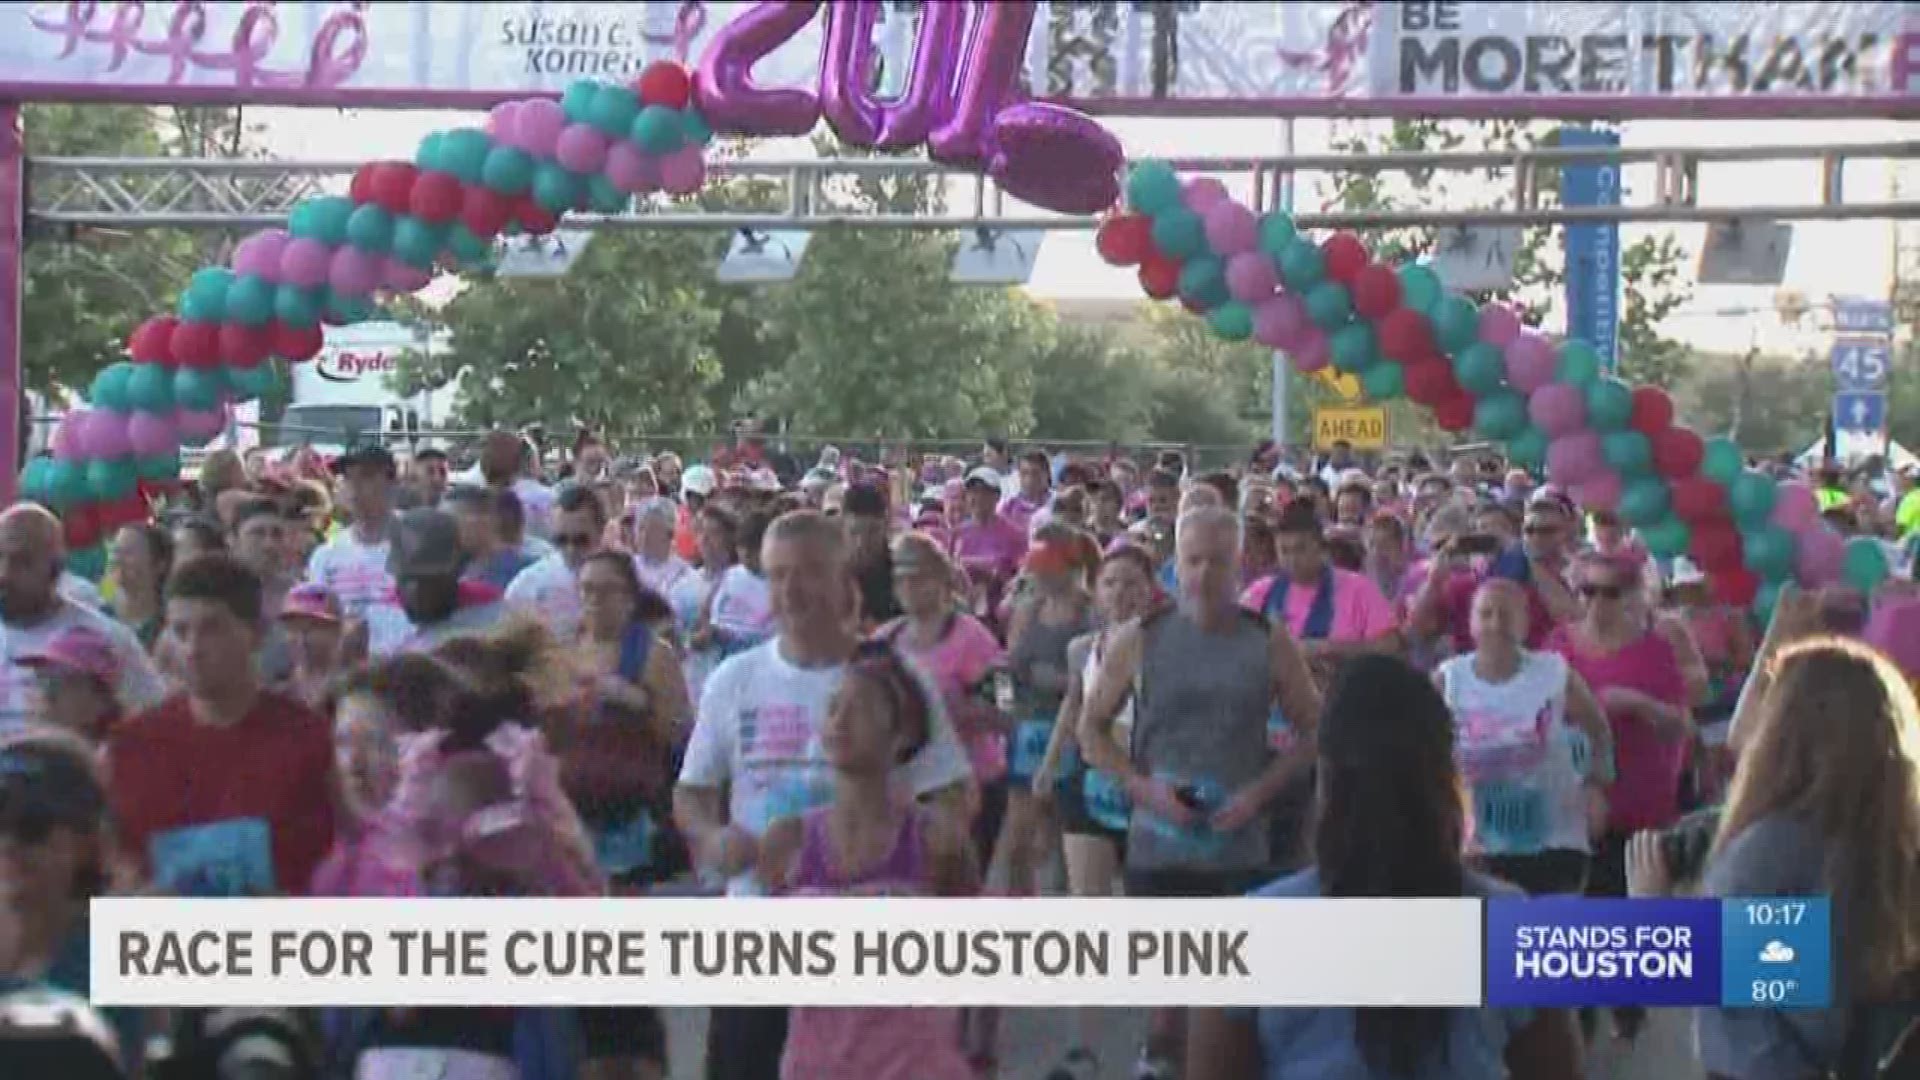 Runners turned Houston pink for the Susan G. Komen 'Race for the Cure.' This marks the 28th year for the race in Houston.